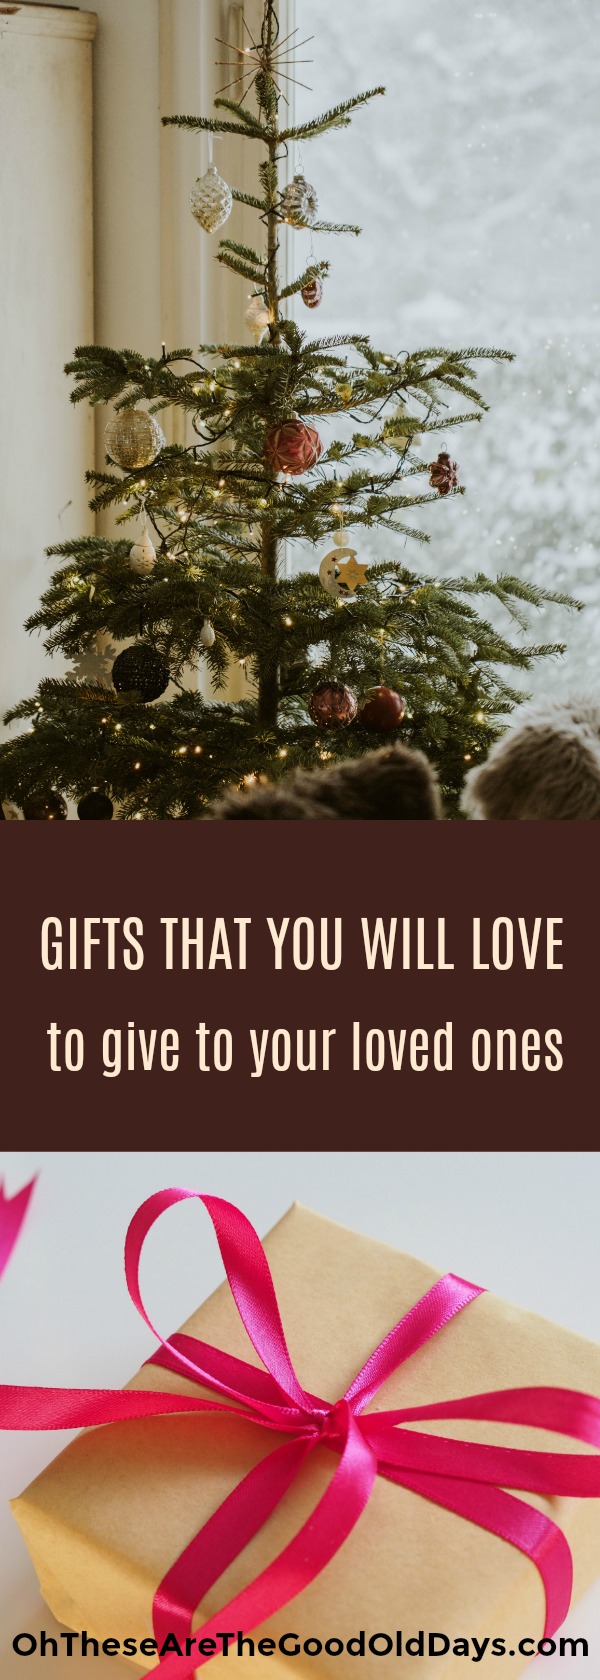 Gifts That You Will Love to Give Your Loved Ones